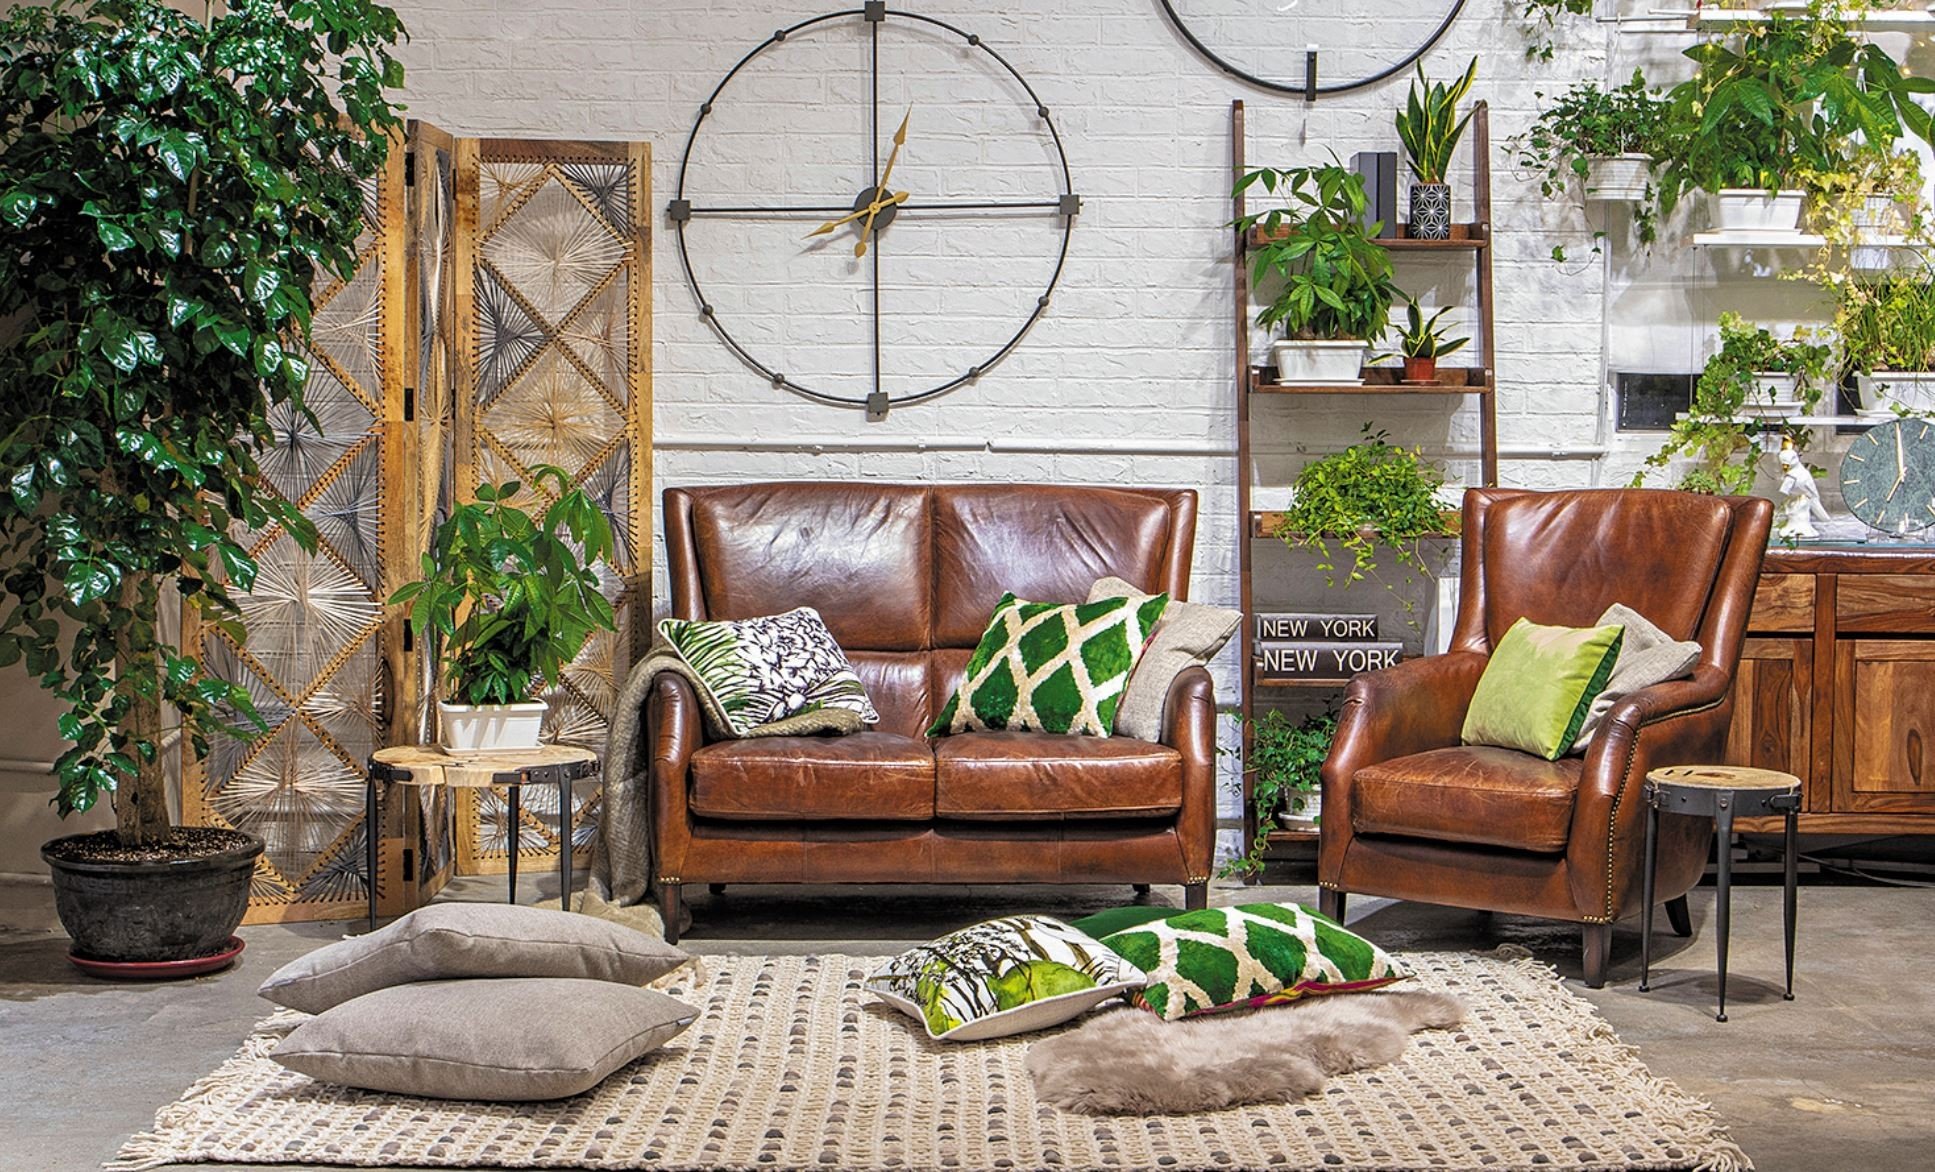 Another flash look is New York retro – think vintage leather sofas and an eclectic mix of furnishings, such as on the television show Friends – and in these furnishings by Tequila Kola. Photos: Handouts